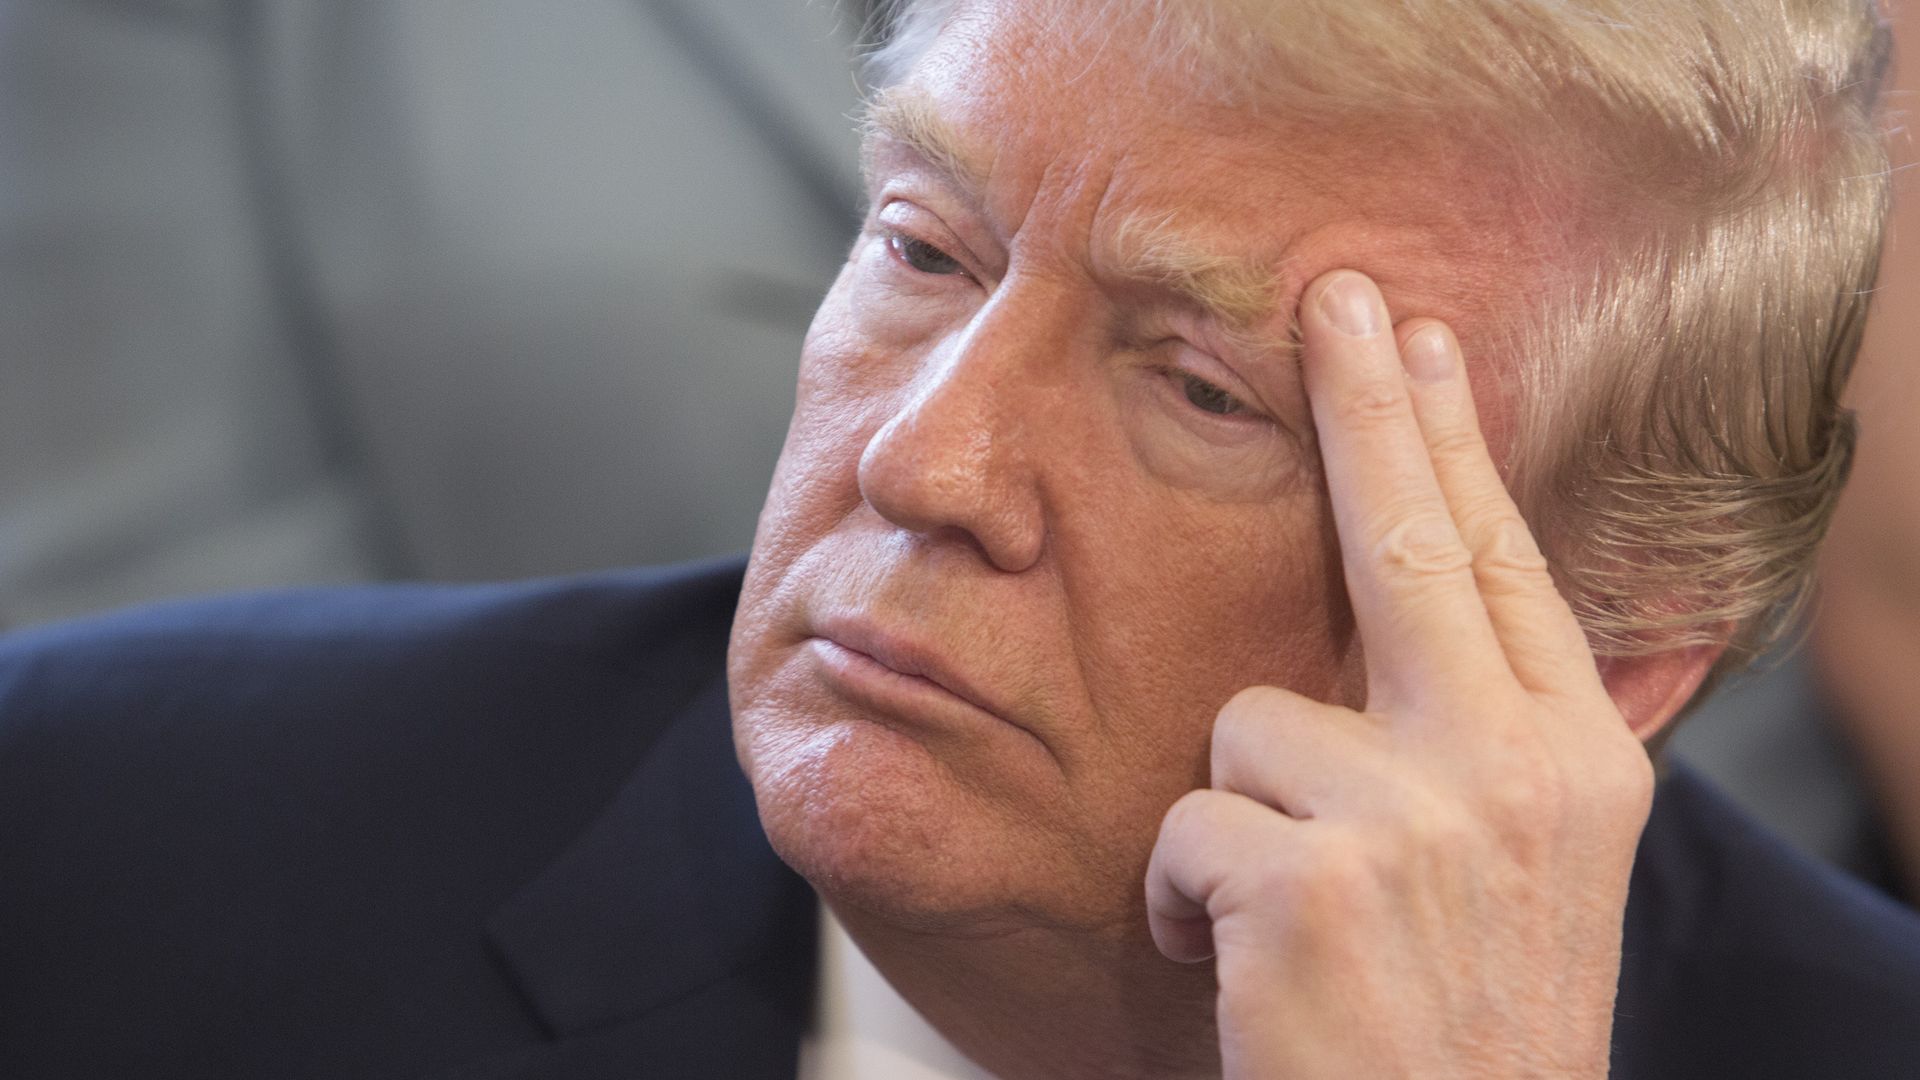 A closeup of Donald Trump looking concerned and looking to the side with two fingers pressed against the side of his forehead